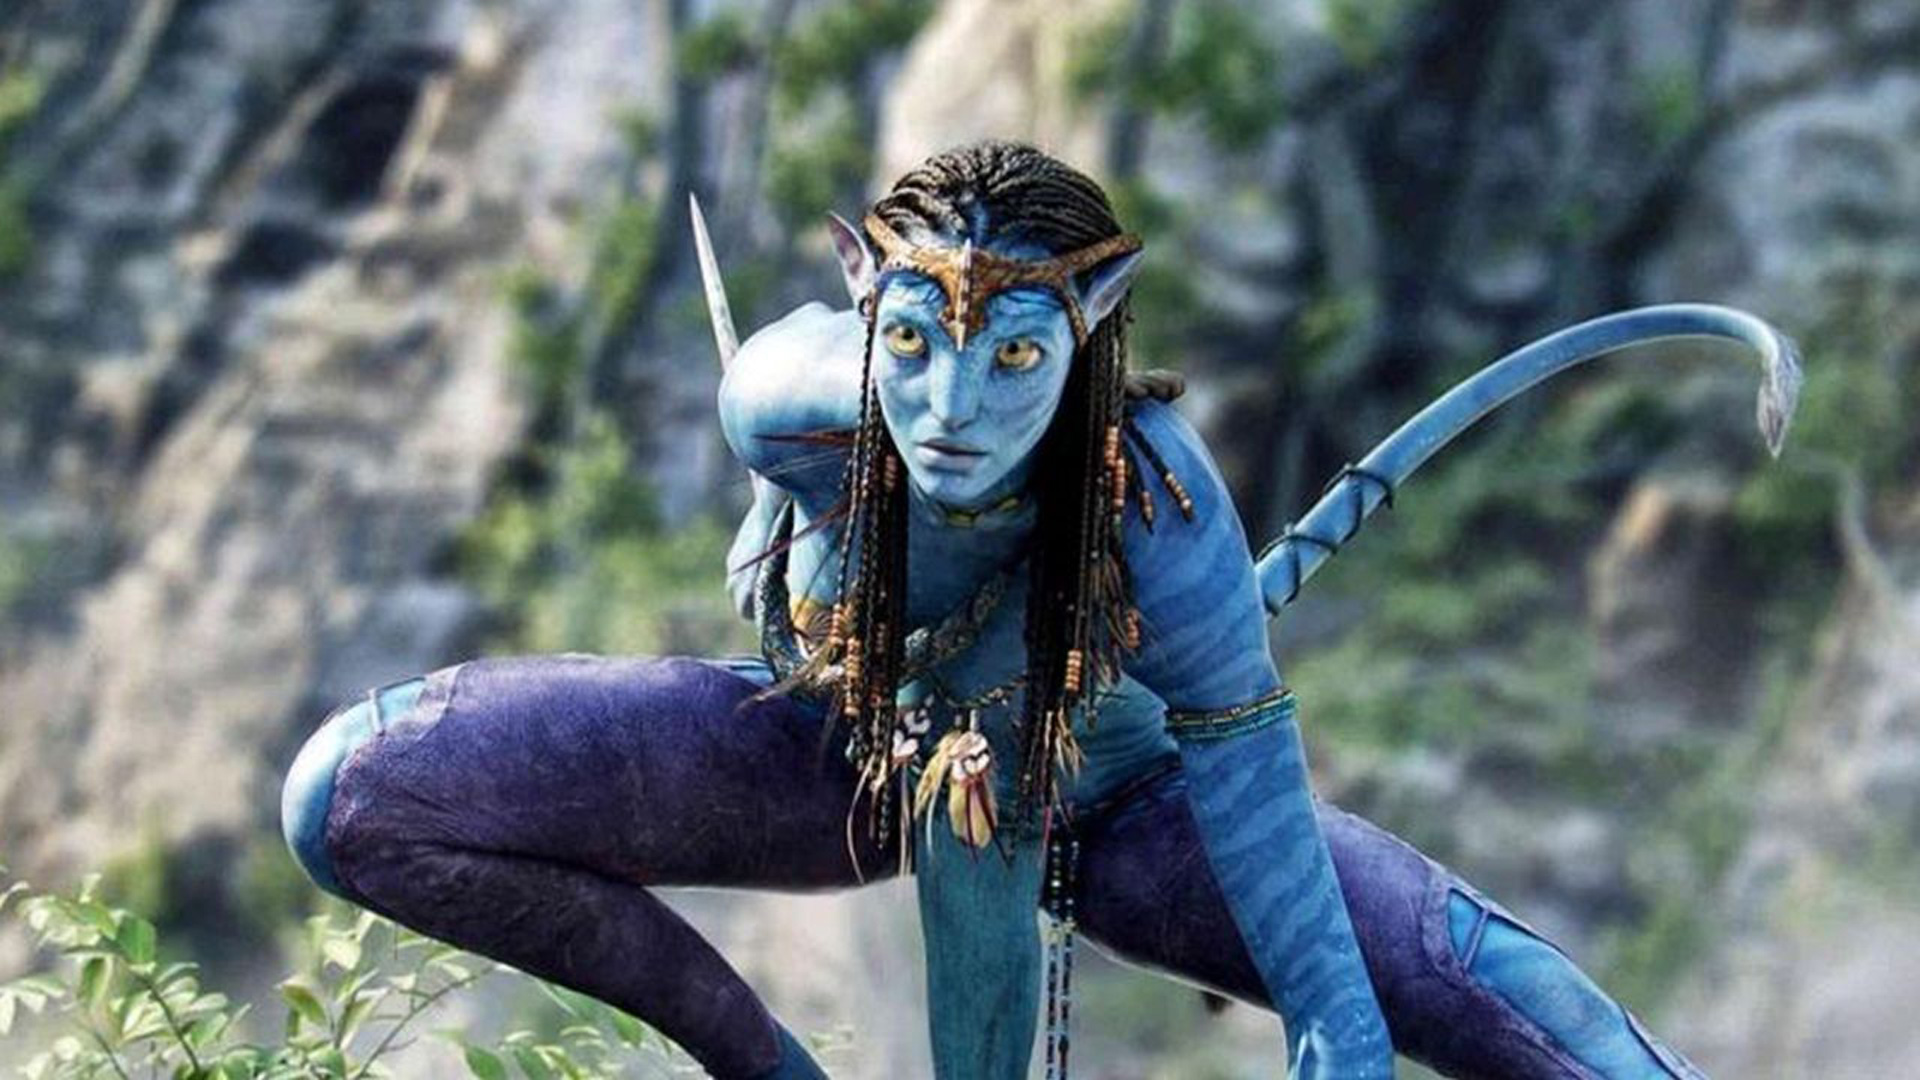 James Cameron Avatar 2 budget: How expensive is it?